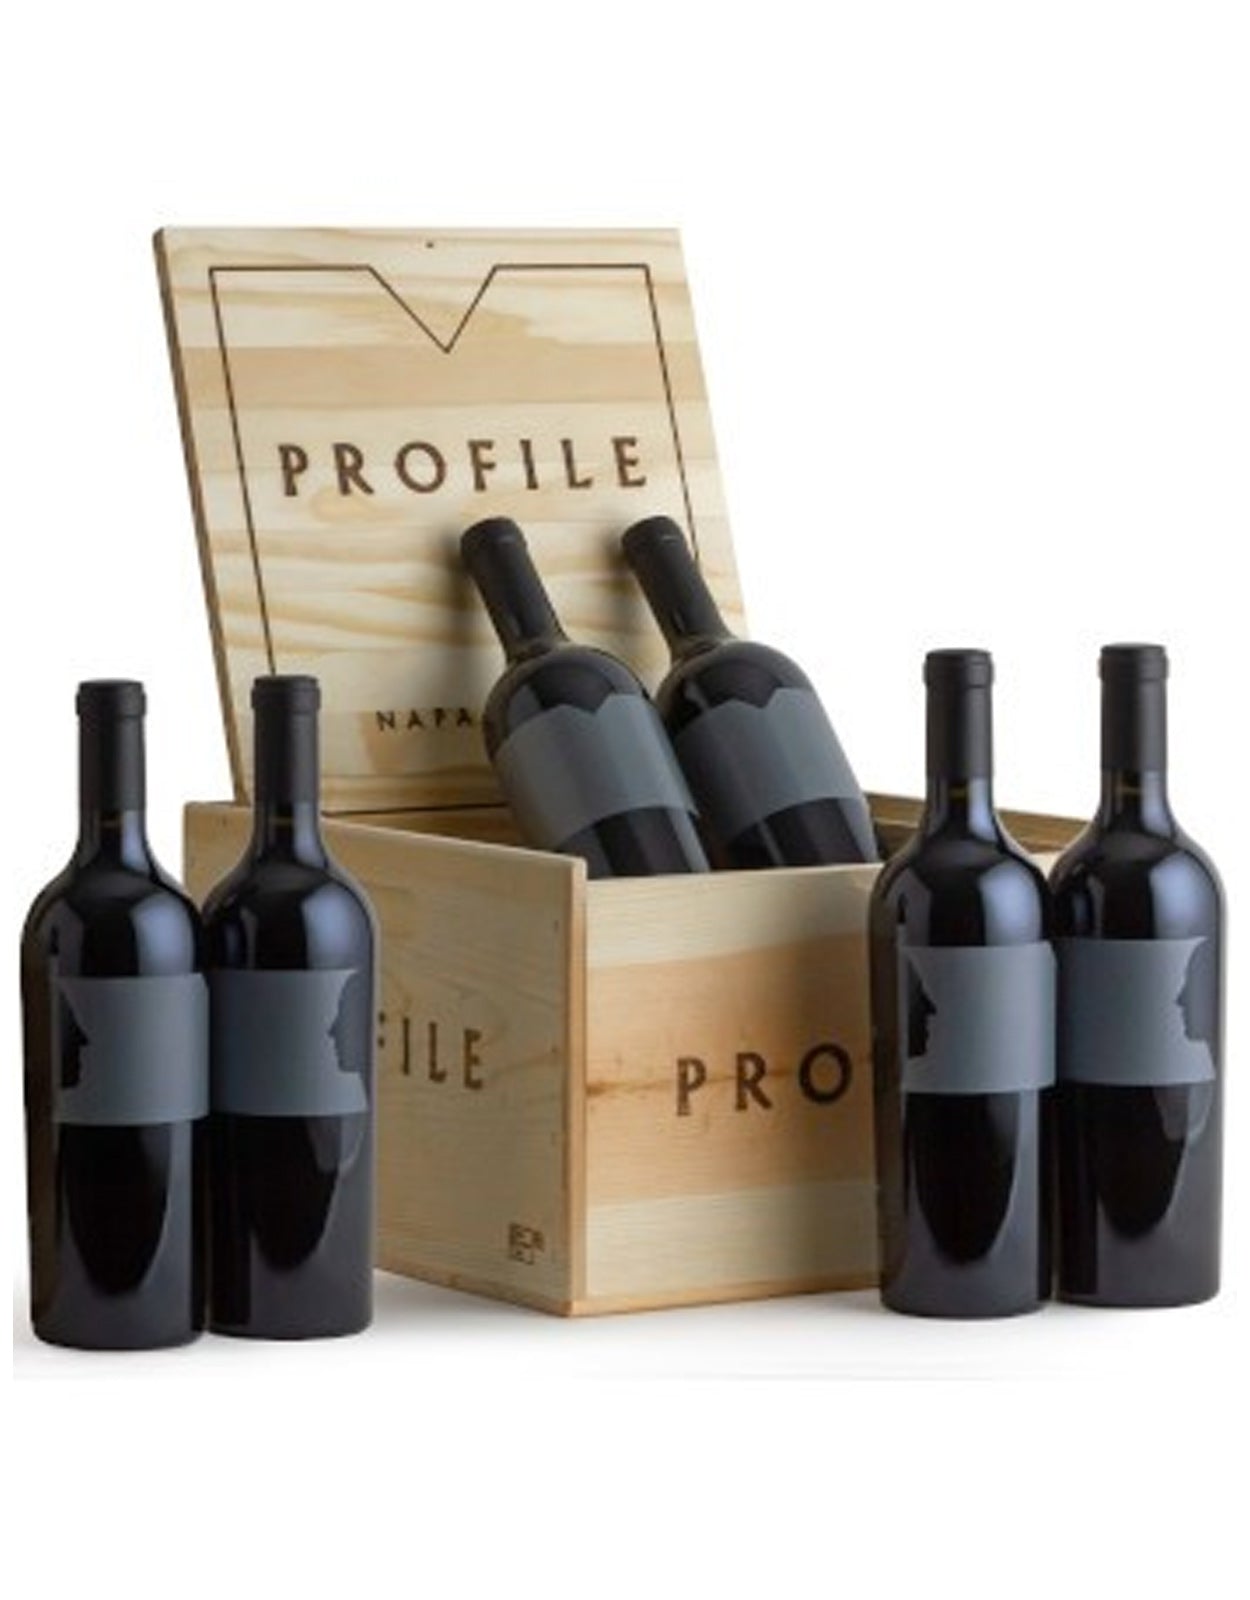 Merryvale Profile Mixed Pack (2011, 2012, 2013) - 6 Bottles